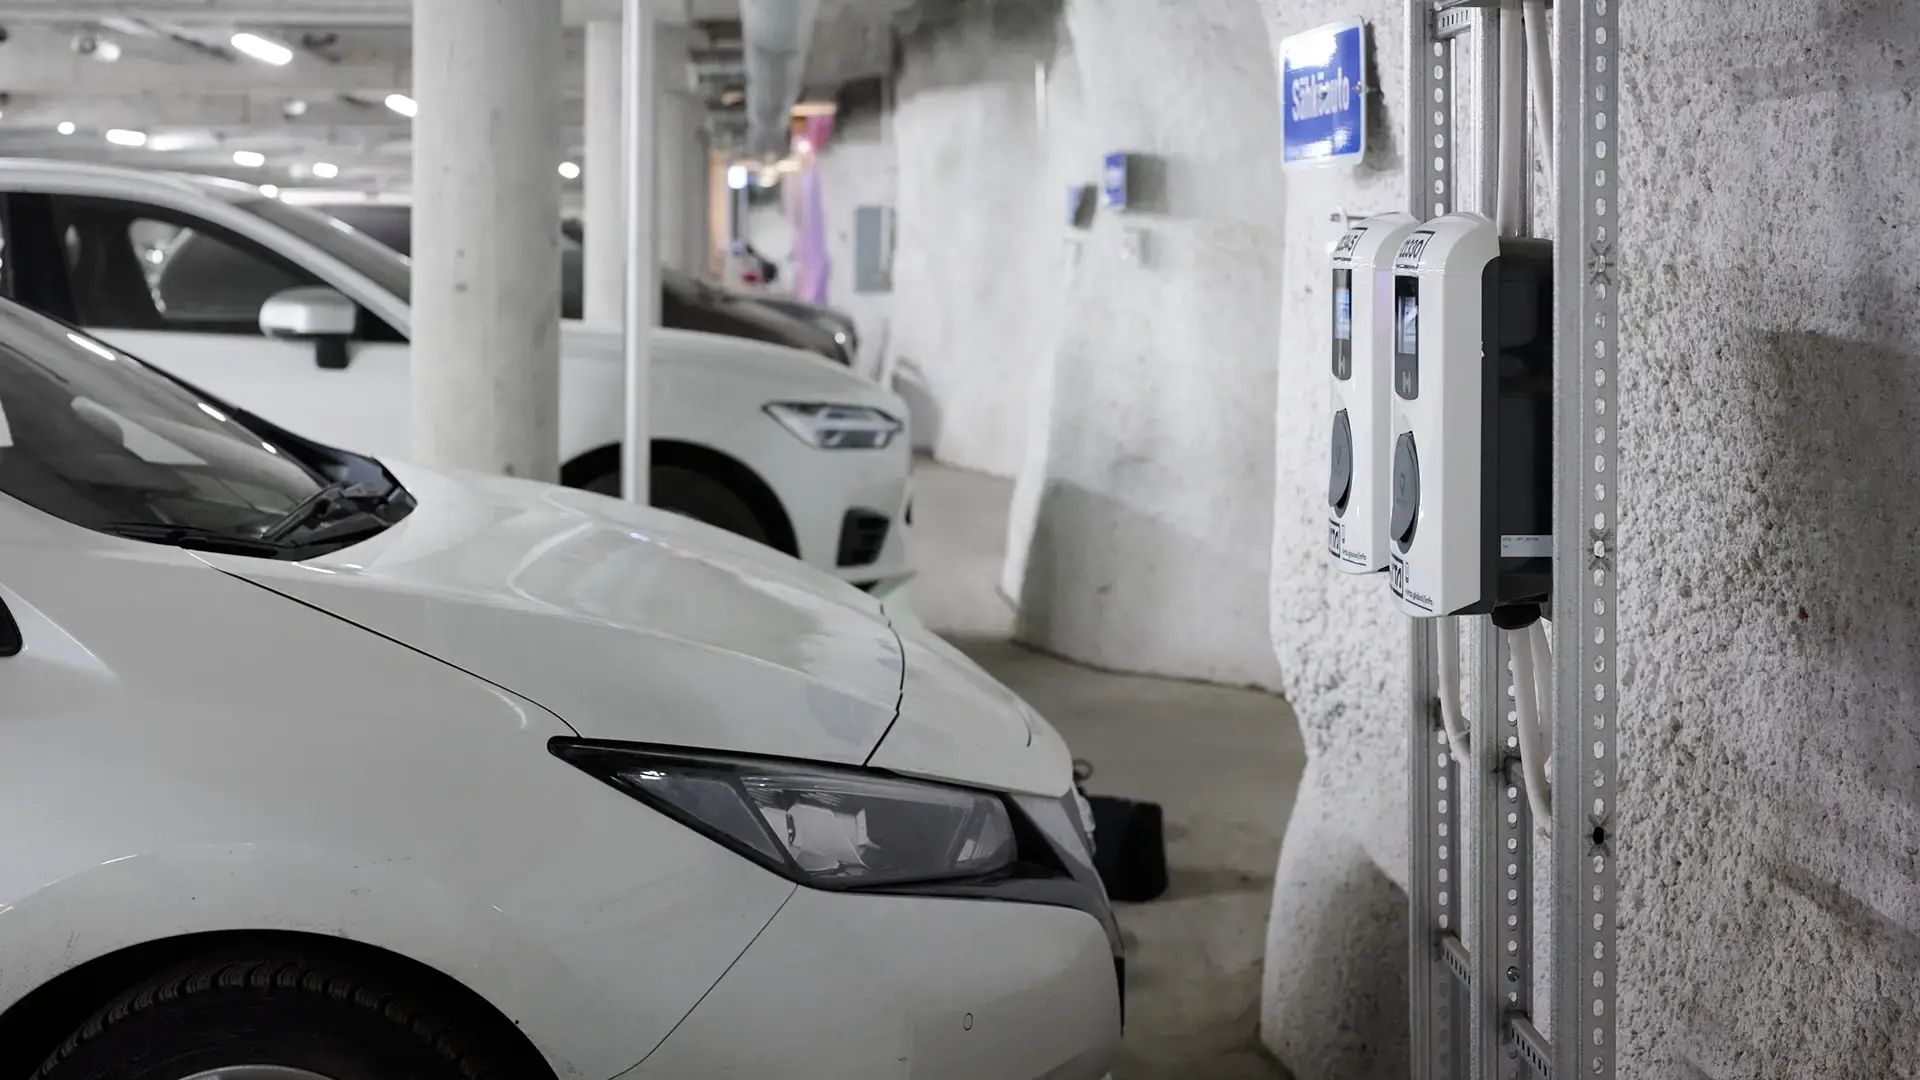 Rokkiparkki car next to two AC chargers in underground parking lot